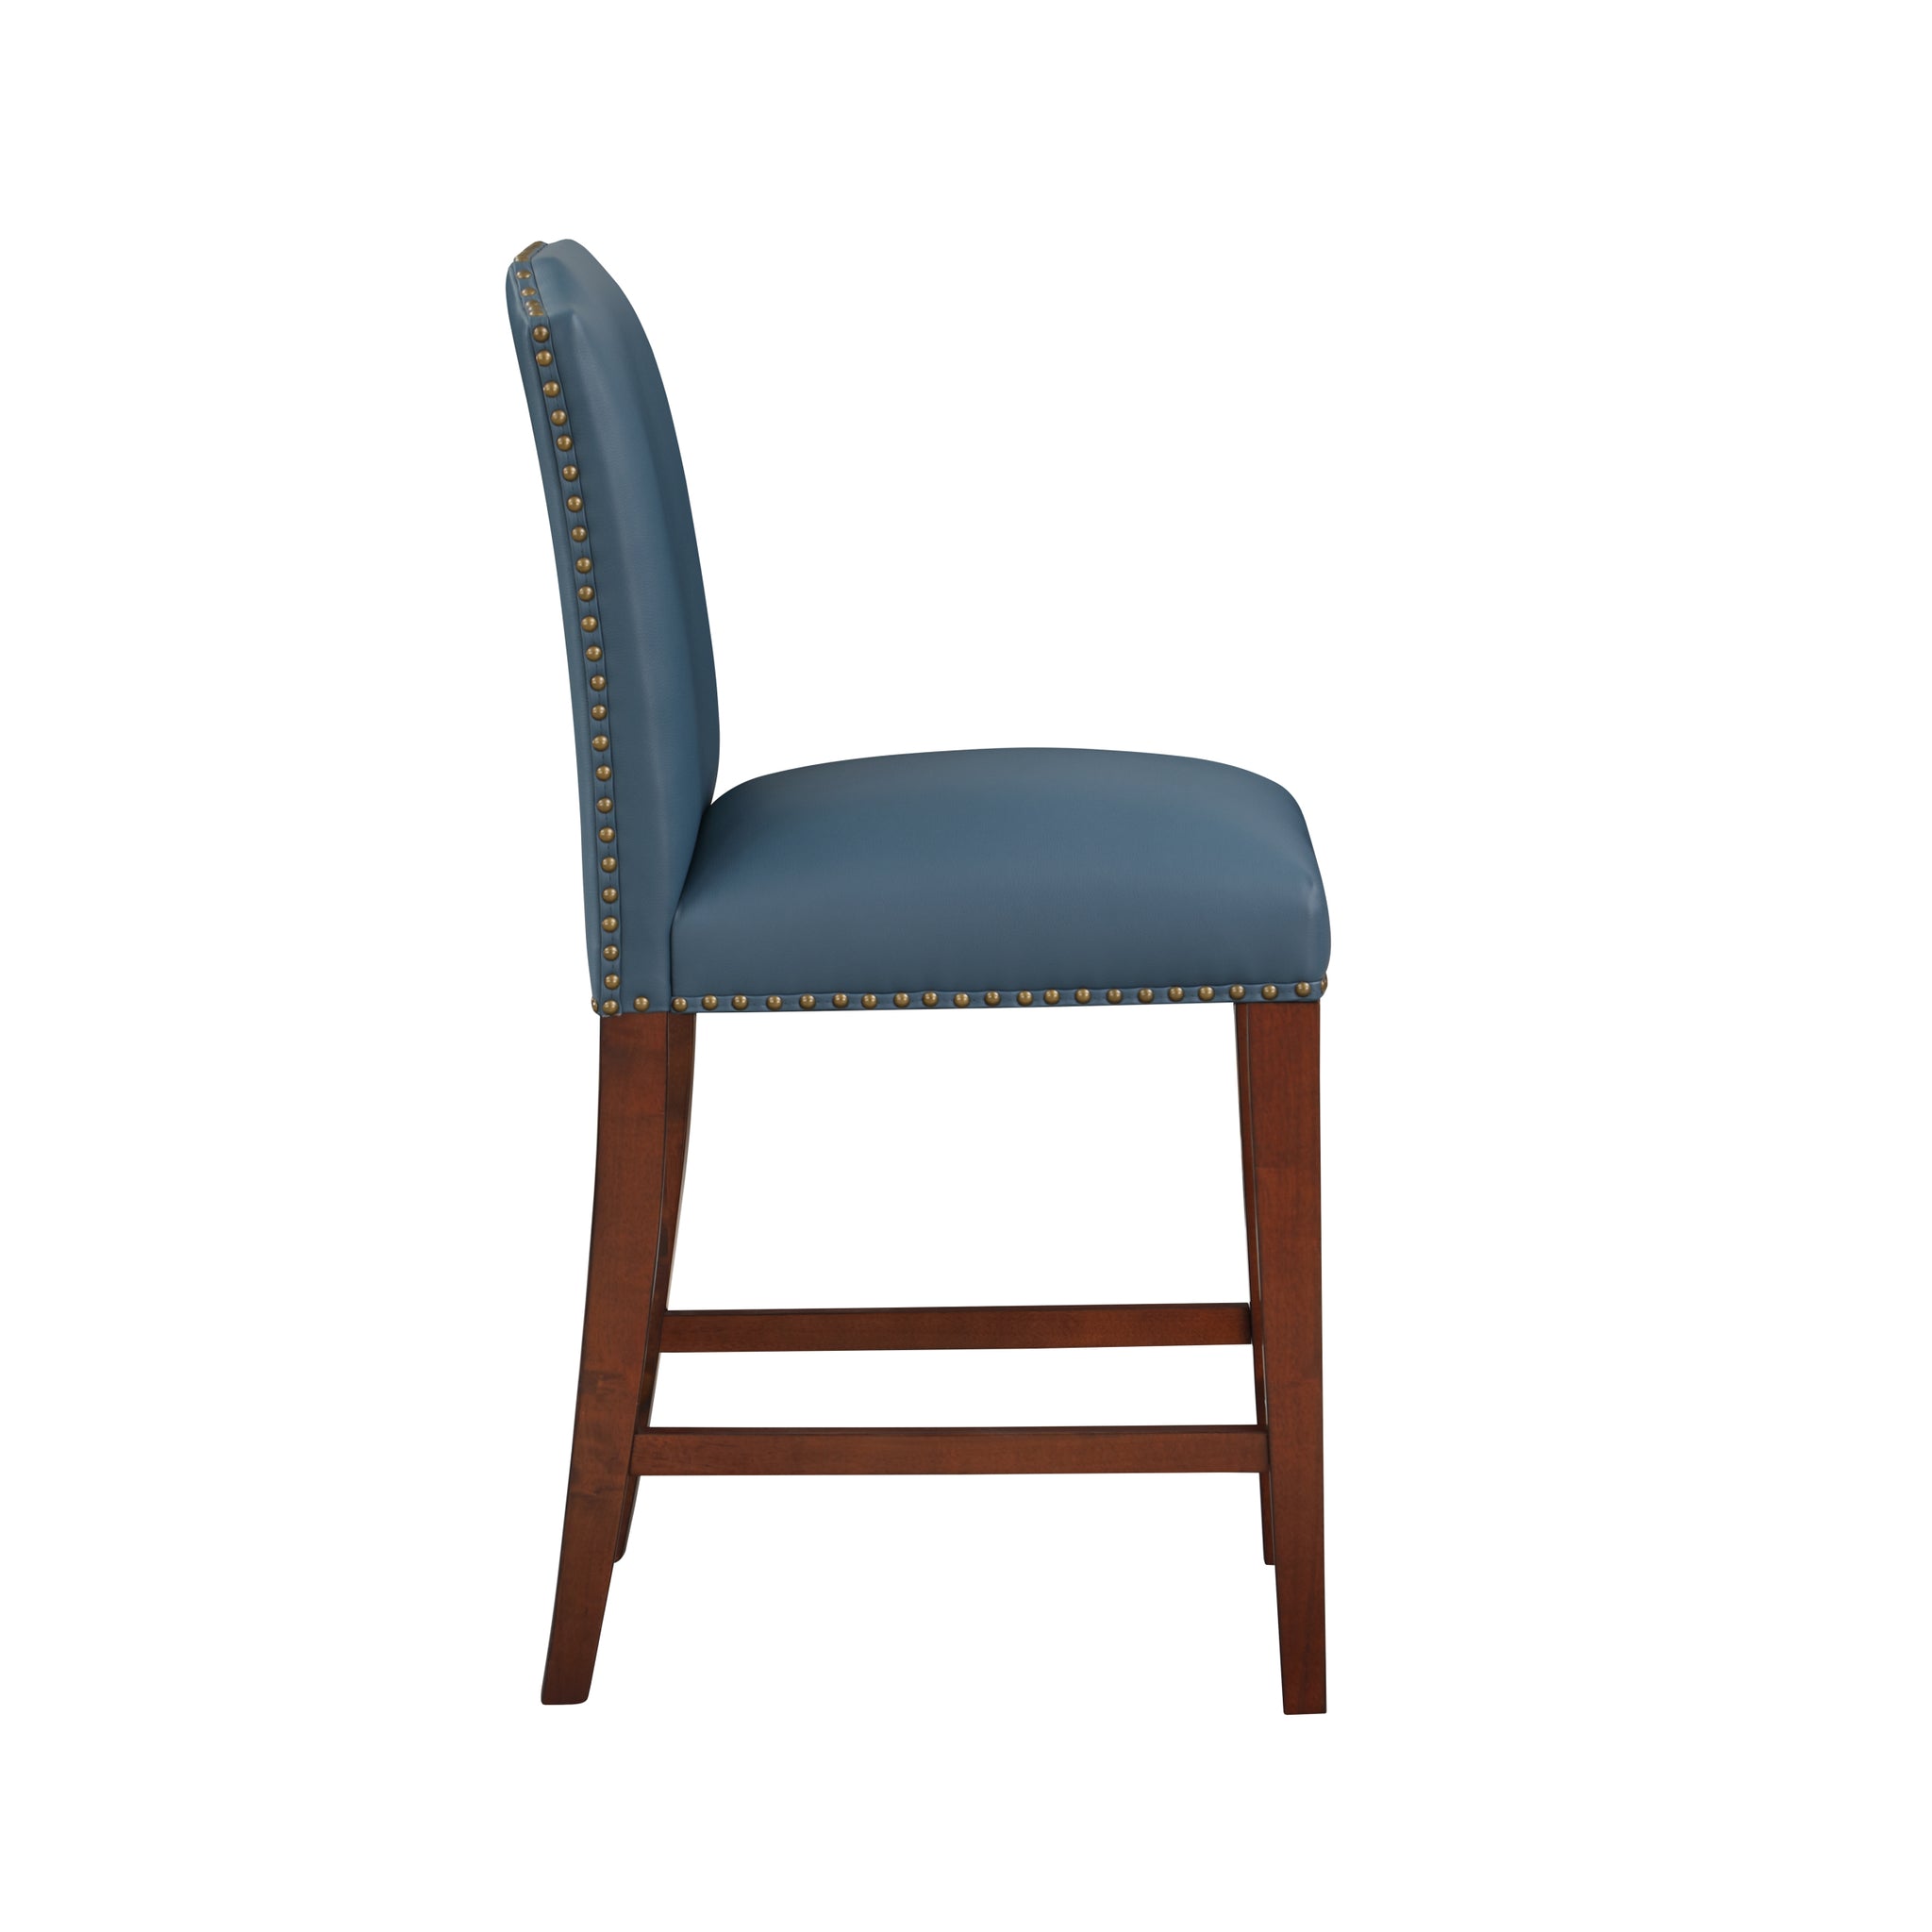 Blaire Stationary Blue Faux Leather Counter Stool with blue-foam-fabric